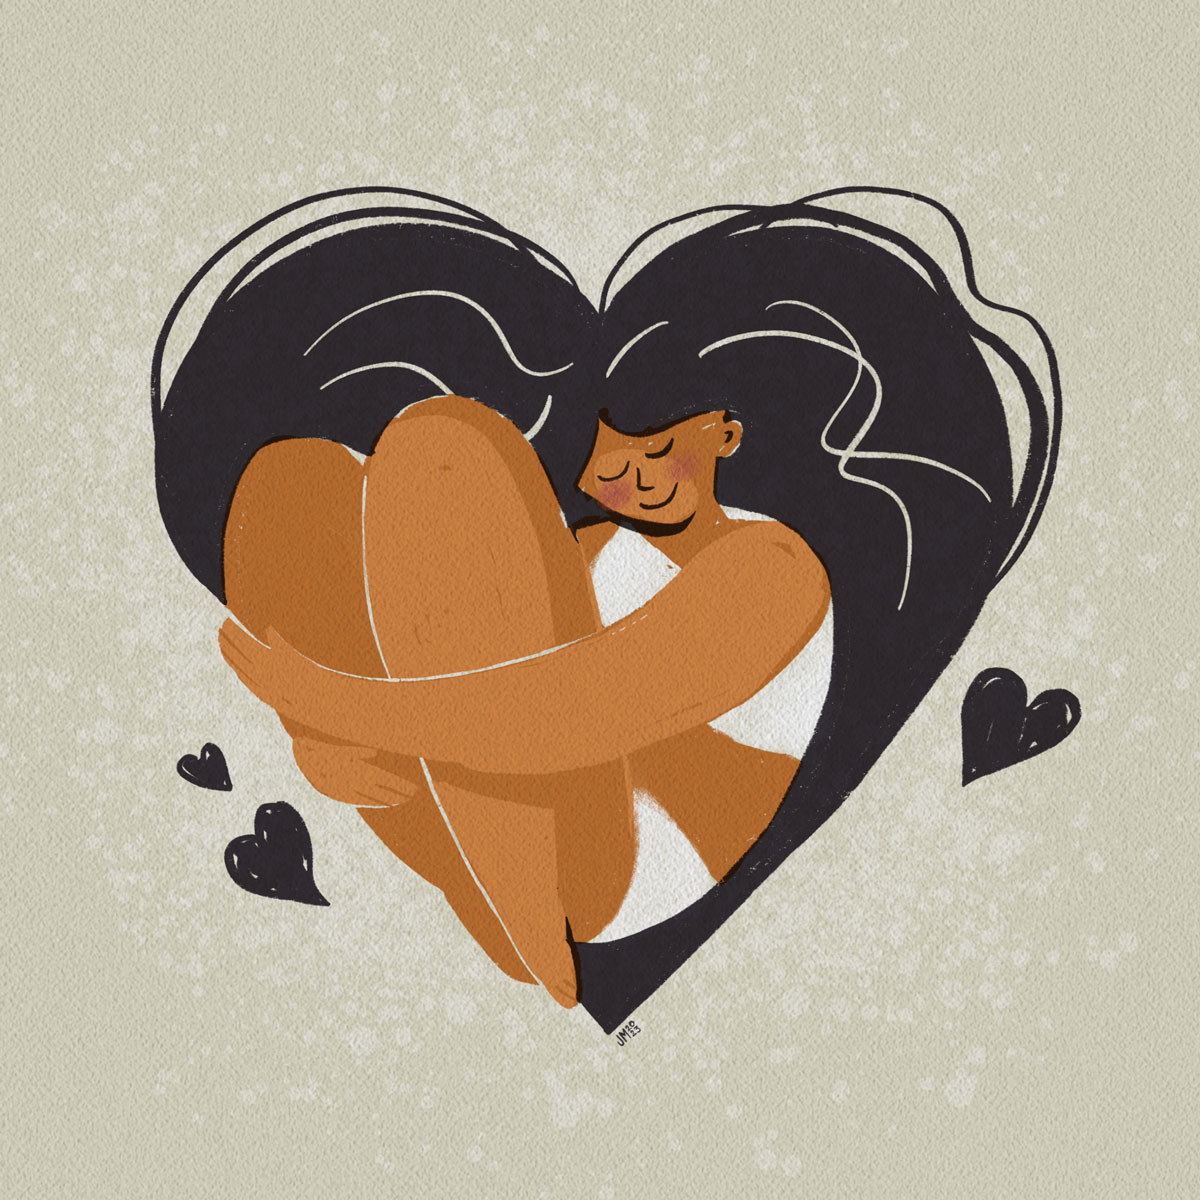 Illustration of person embracing a positive body image